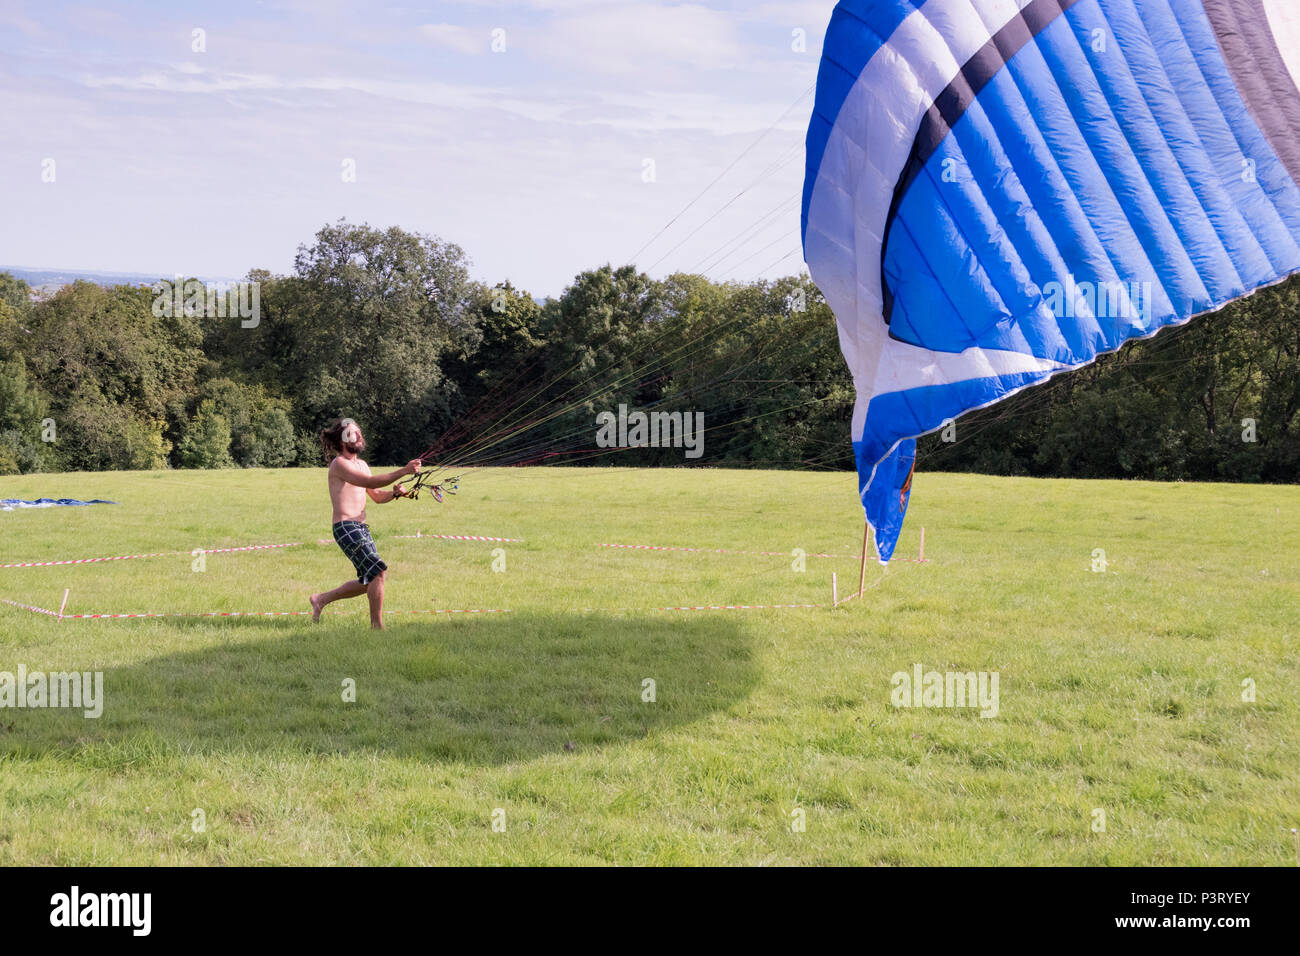 Chepstow, Wales – Aug 14: Man launching a paraglider on 14 Aug 2016 at the Green Gathering Festival site Stock Photo